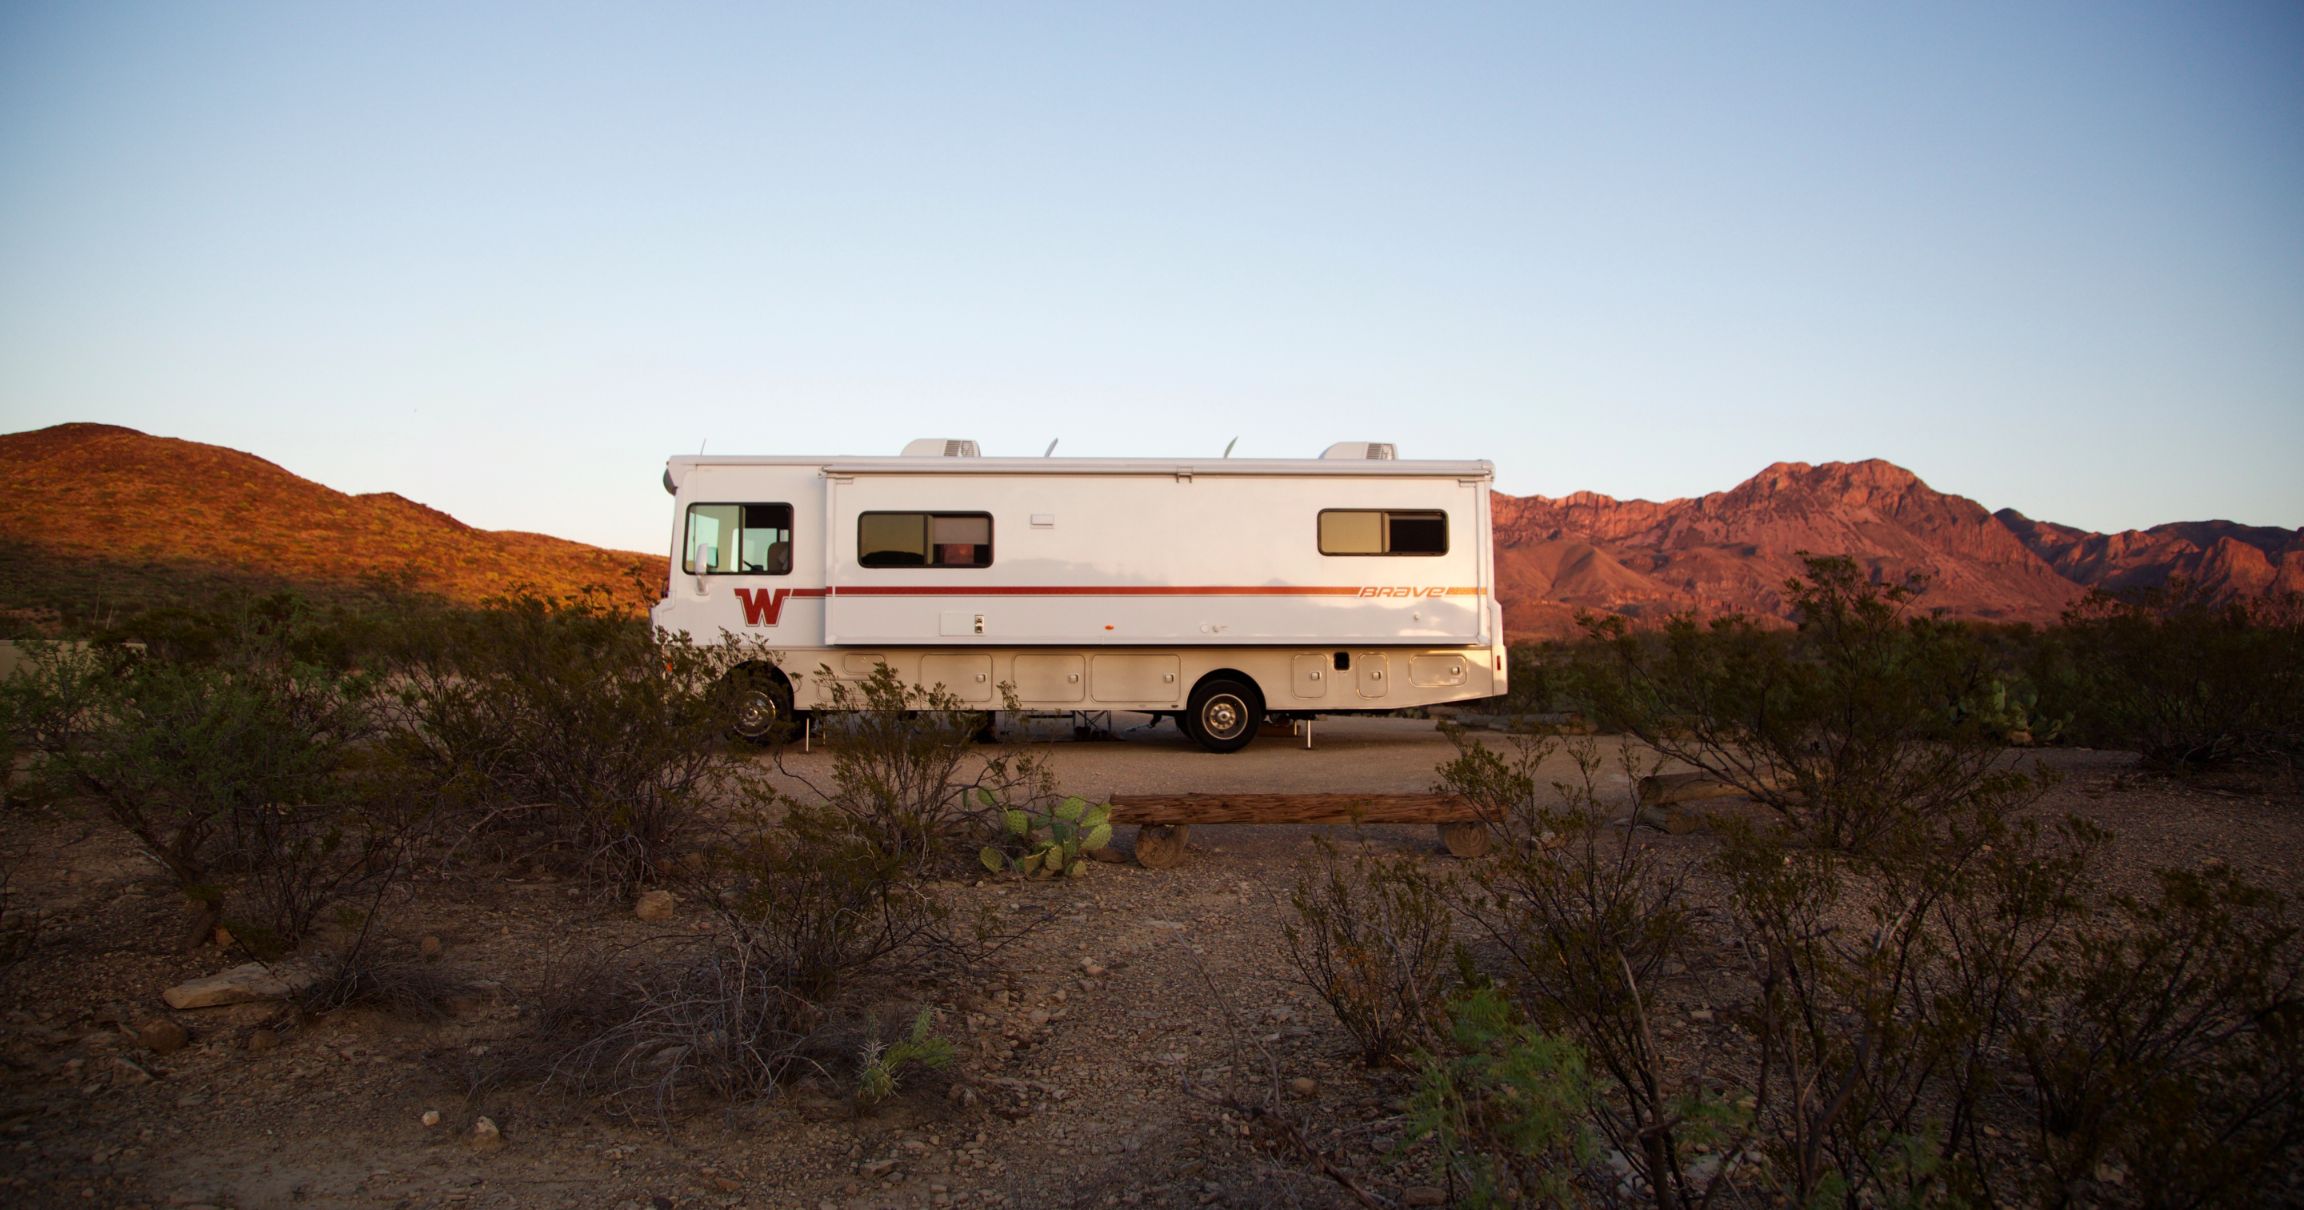 Winnebago Brave parked in a camp site surrounded by desert terrain and red rocky mountains in the background.